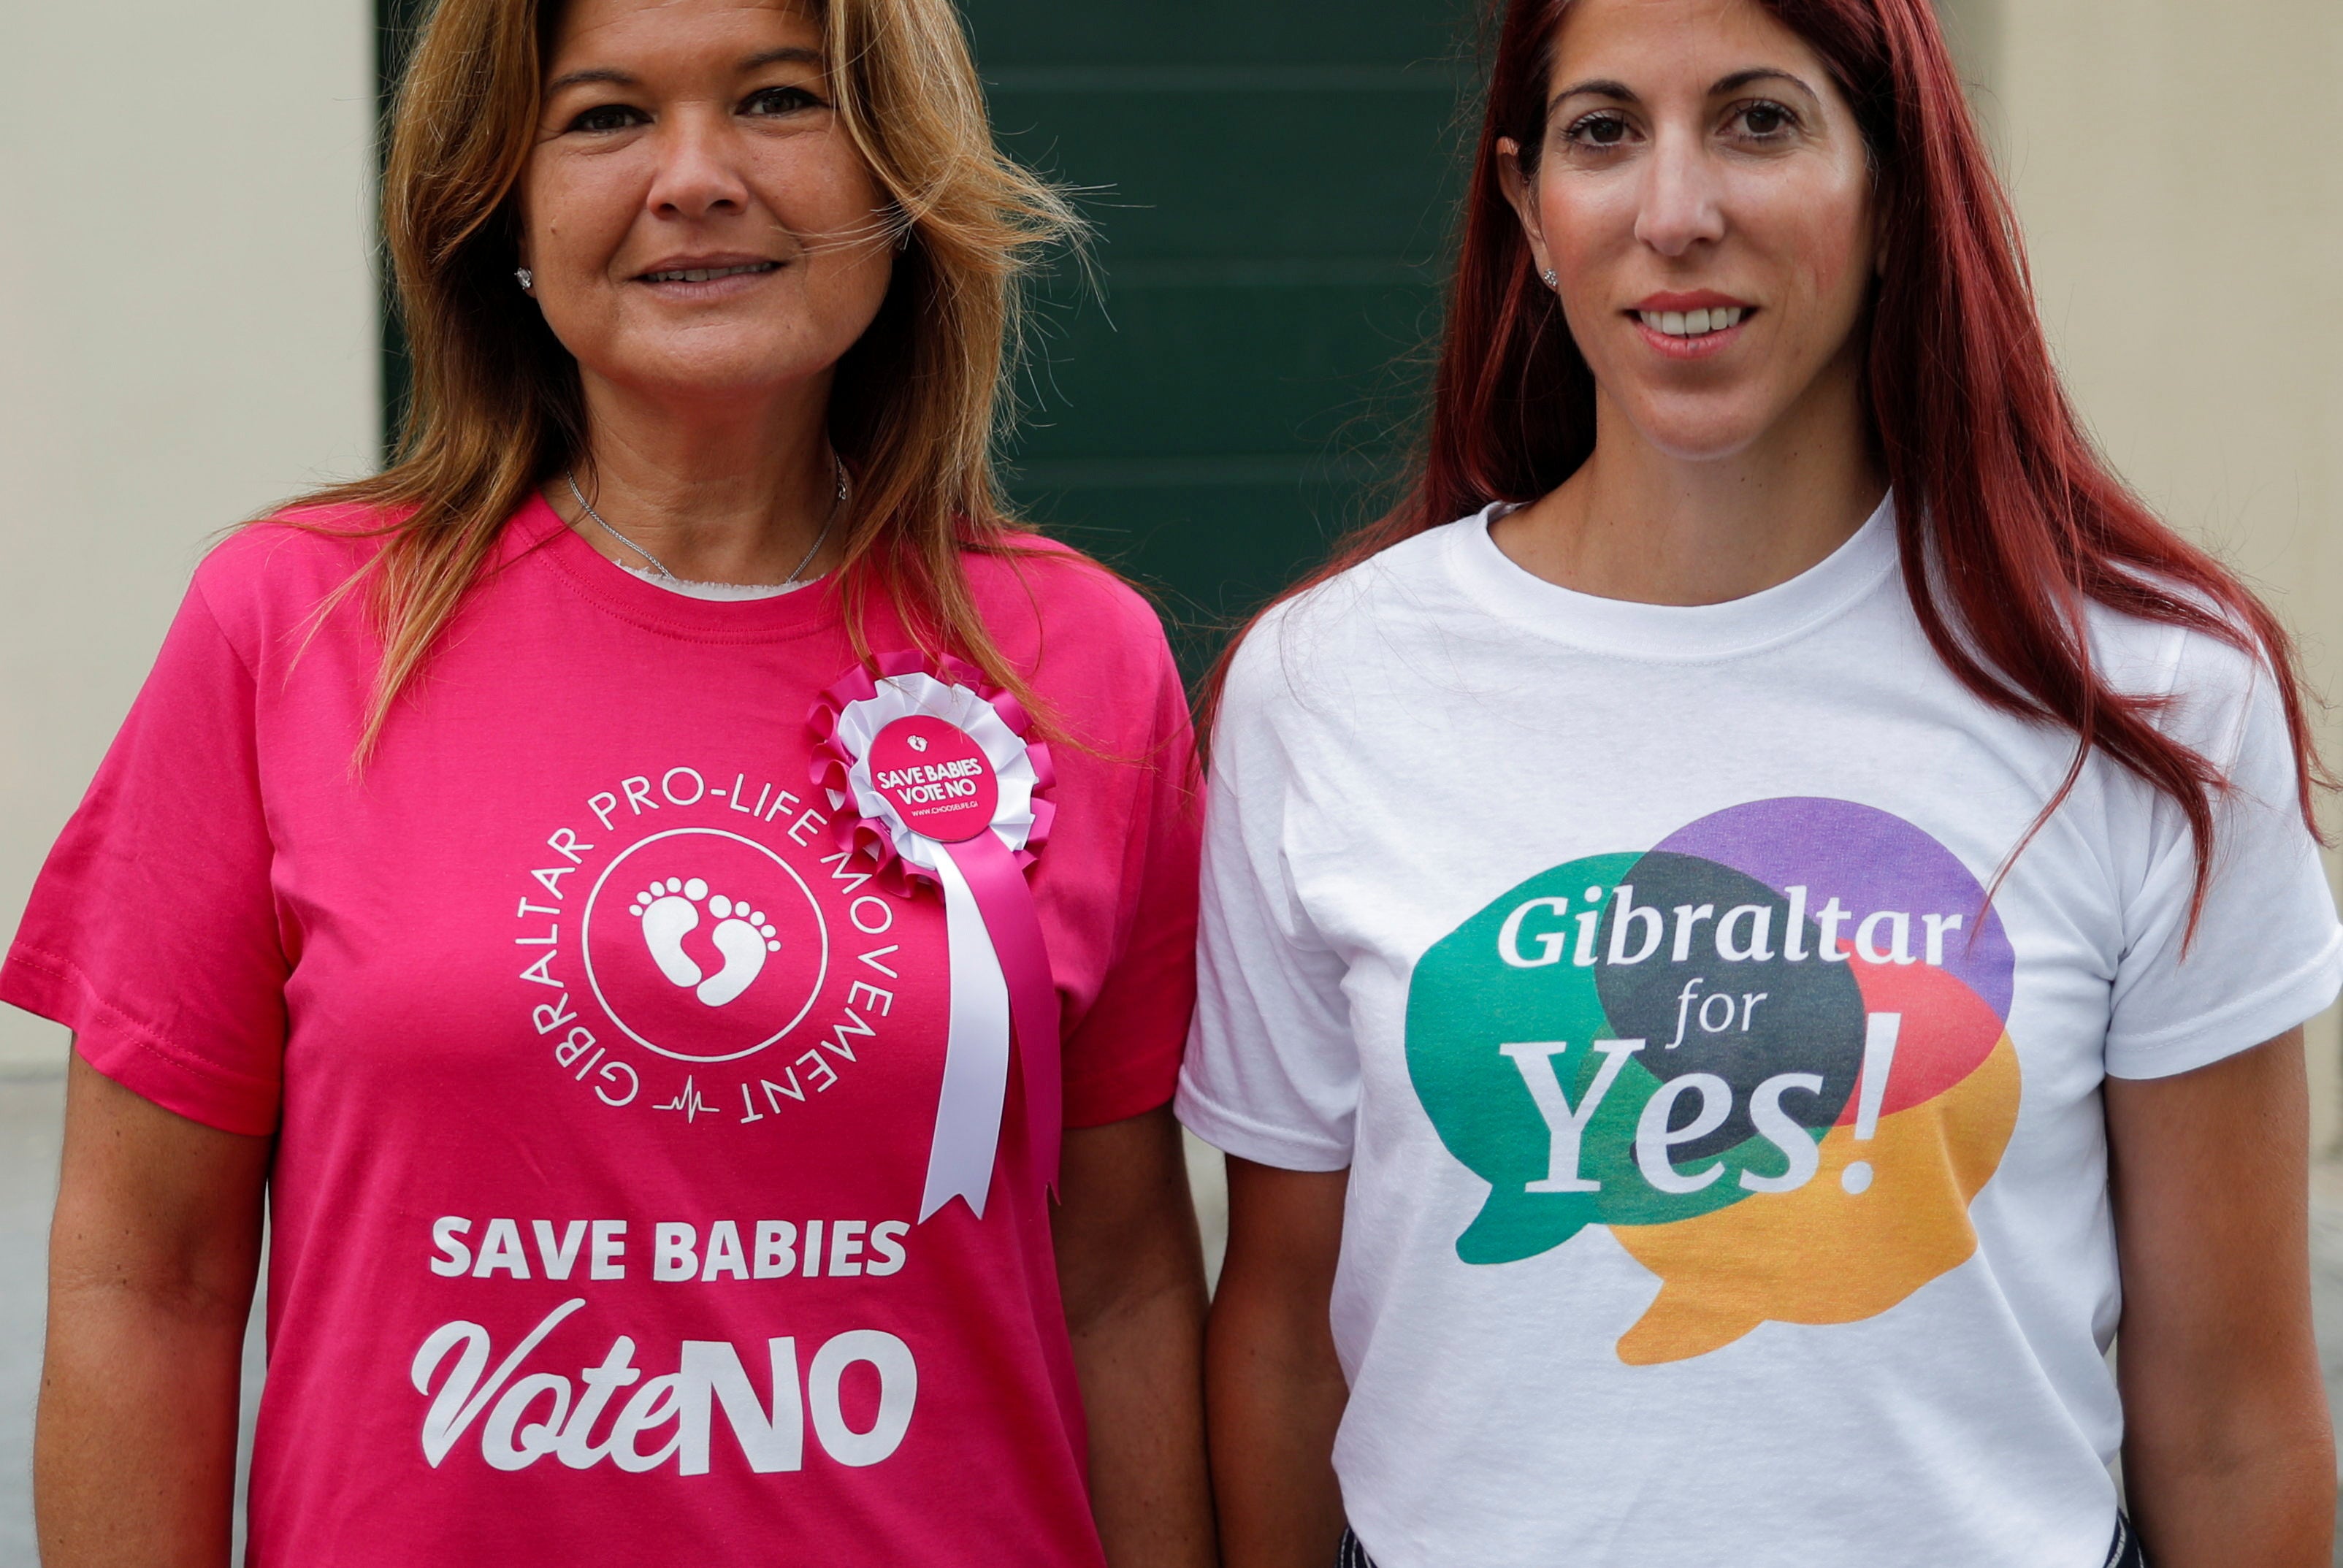 Gibraltarian women from both sides of the campaign outside a polling station on Thursday